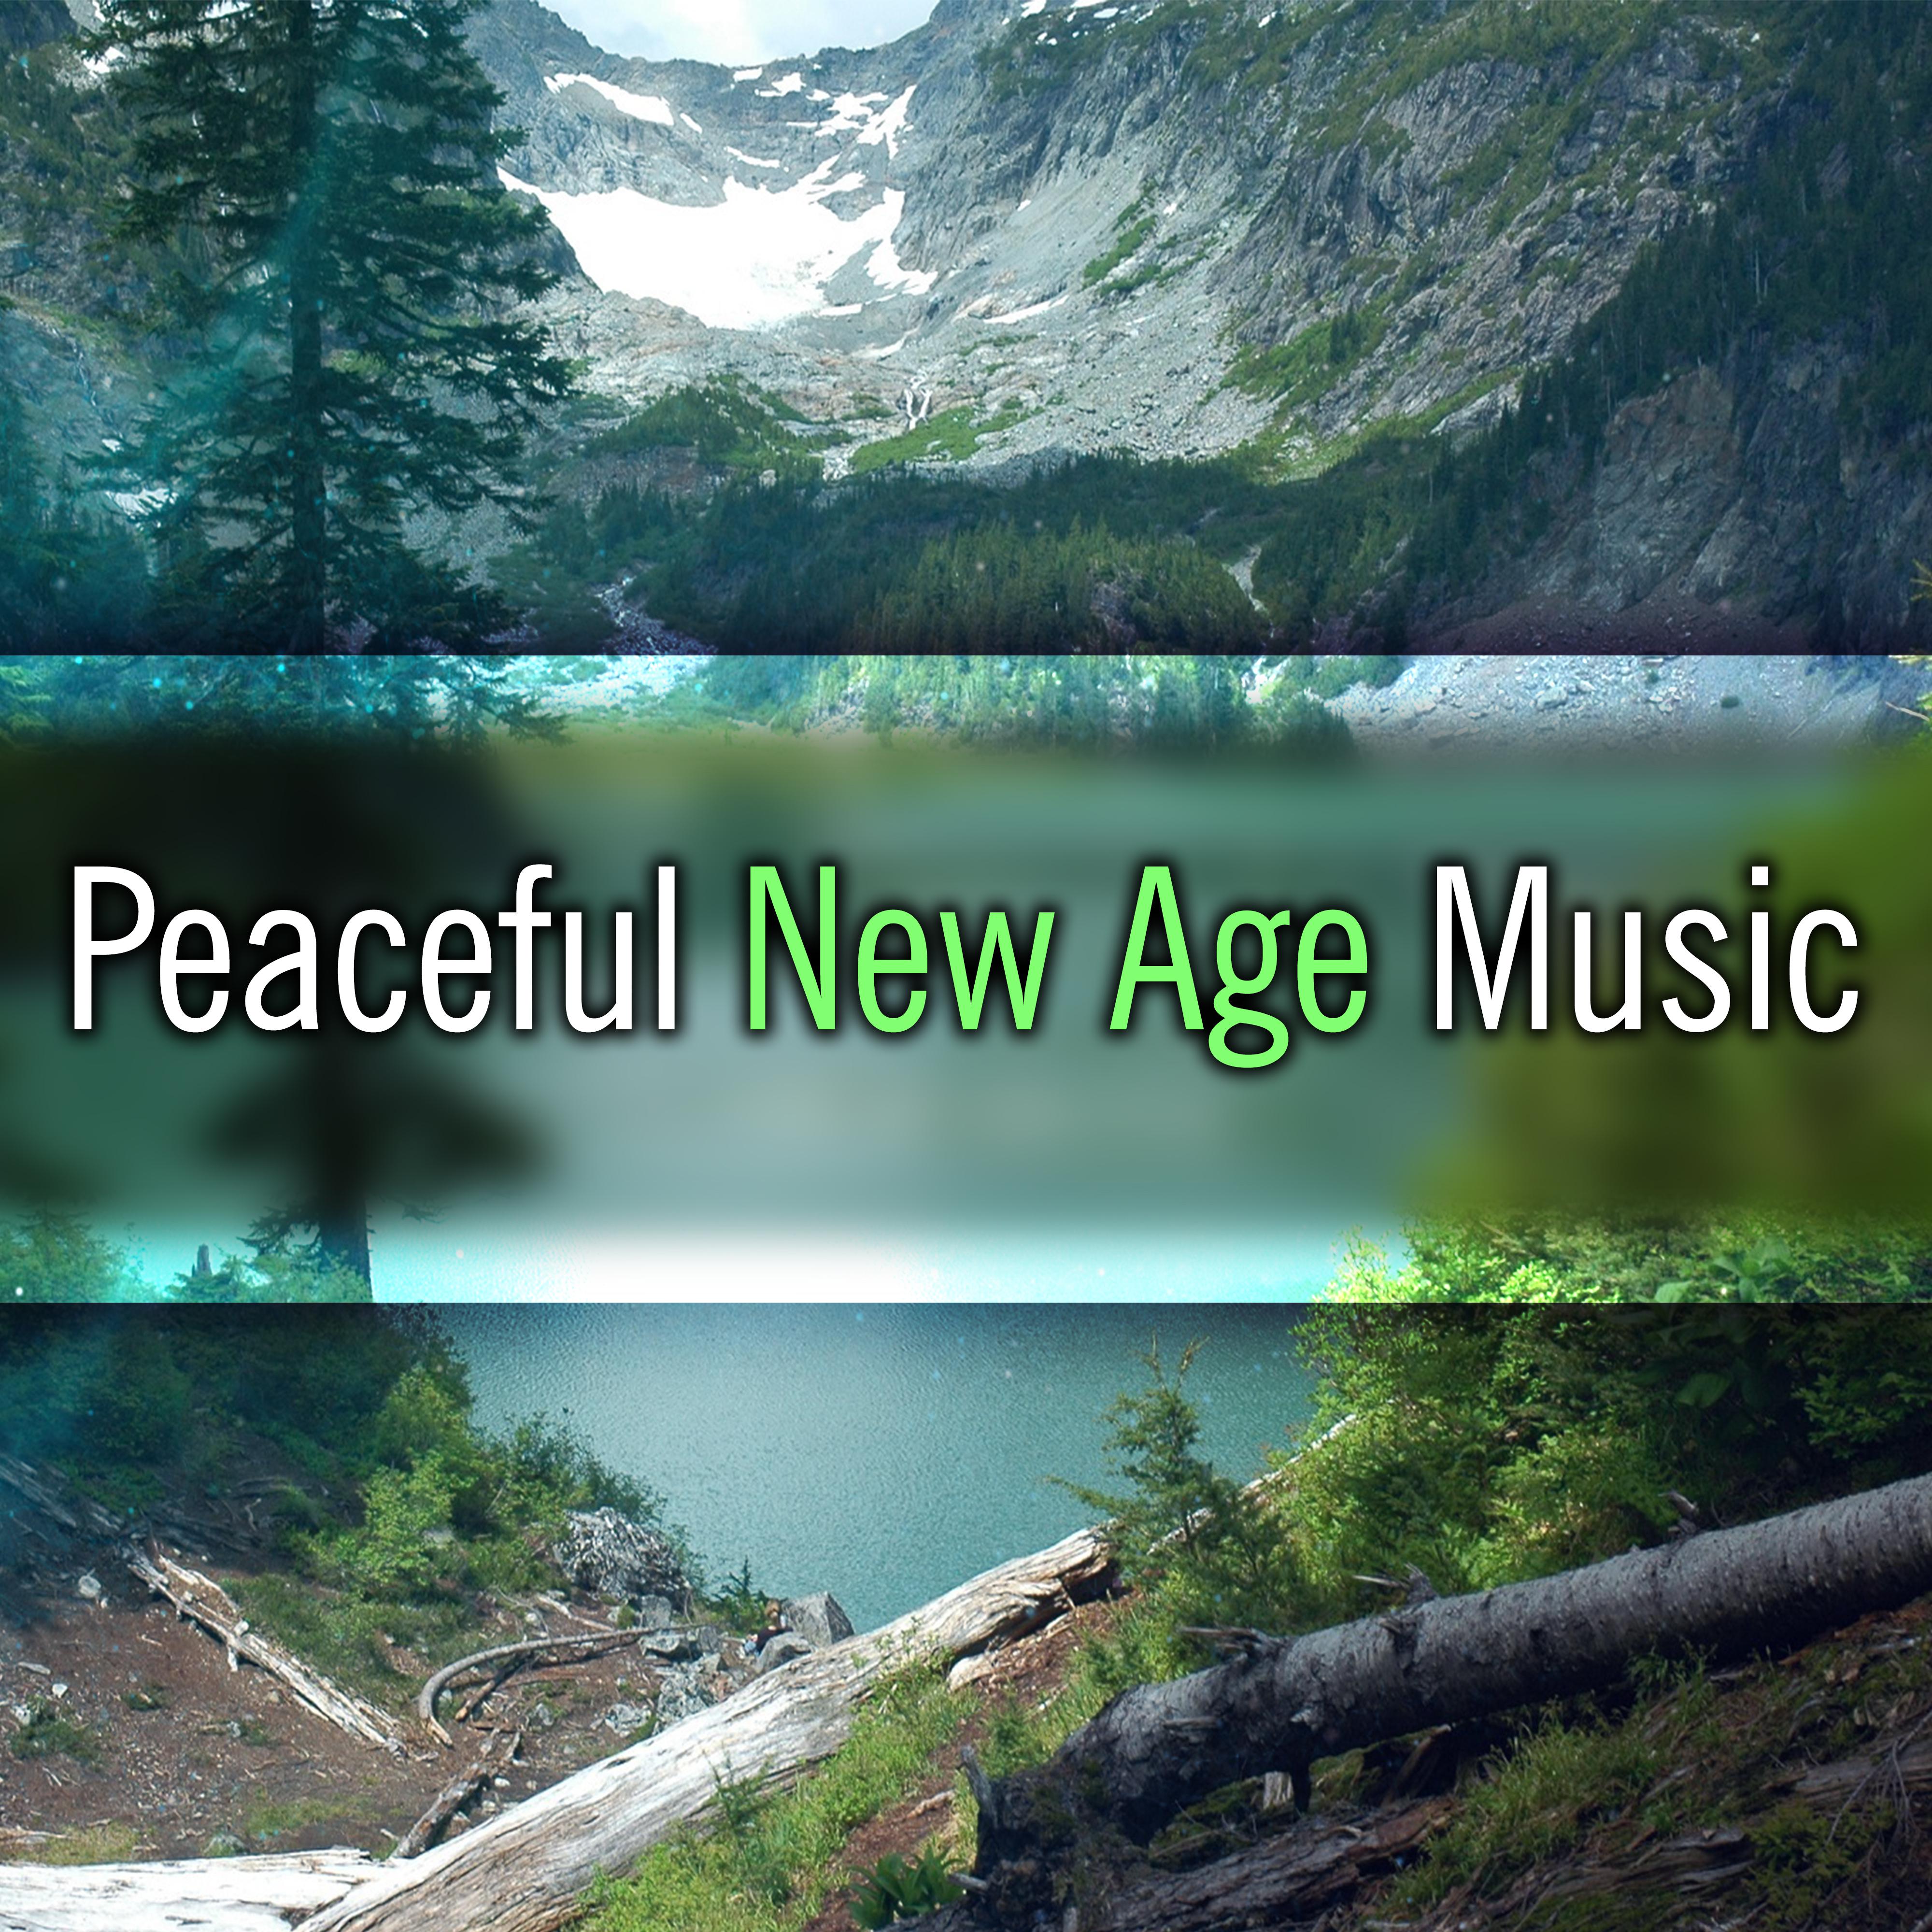 Peaceful New Age Music  Calming Sounds to Relax, Soft Music, Rest a Bit, Soothing Waves